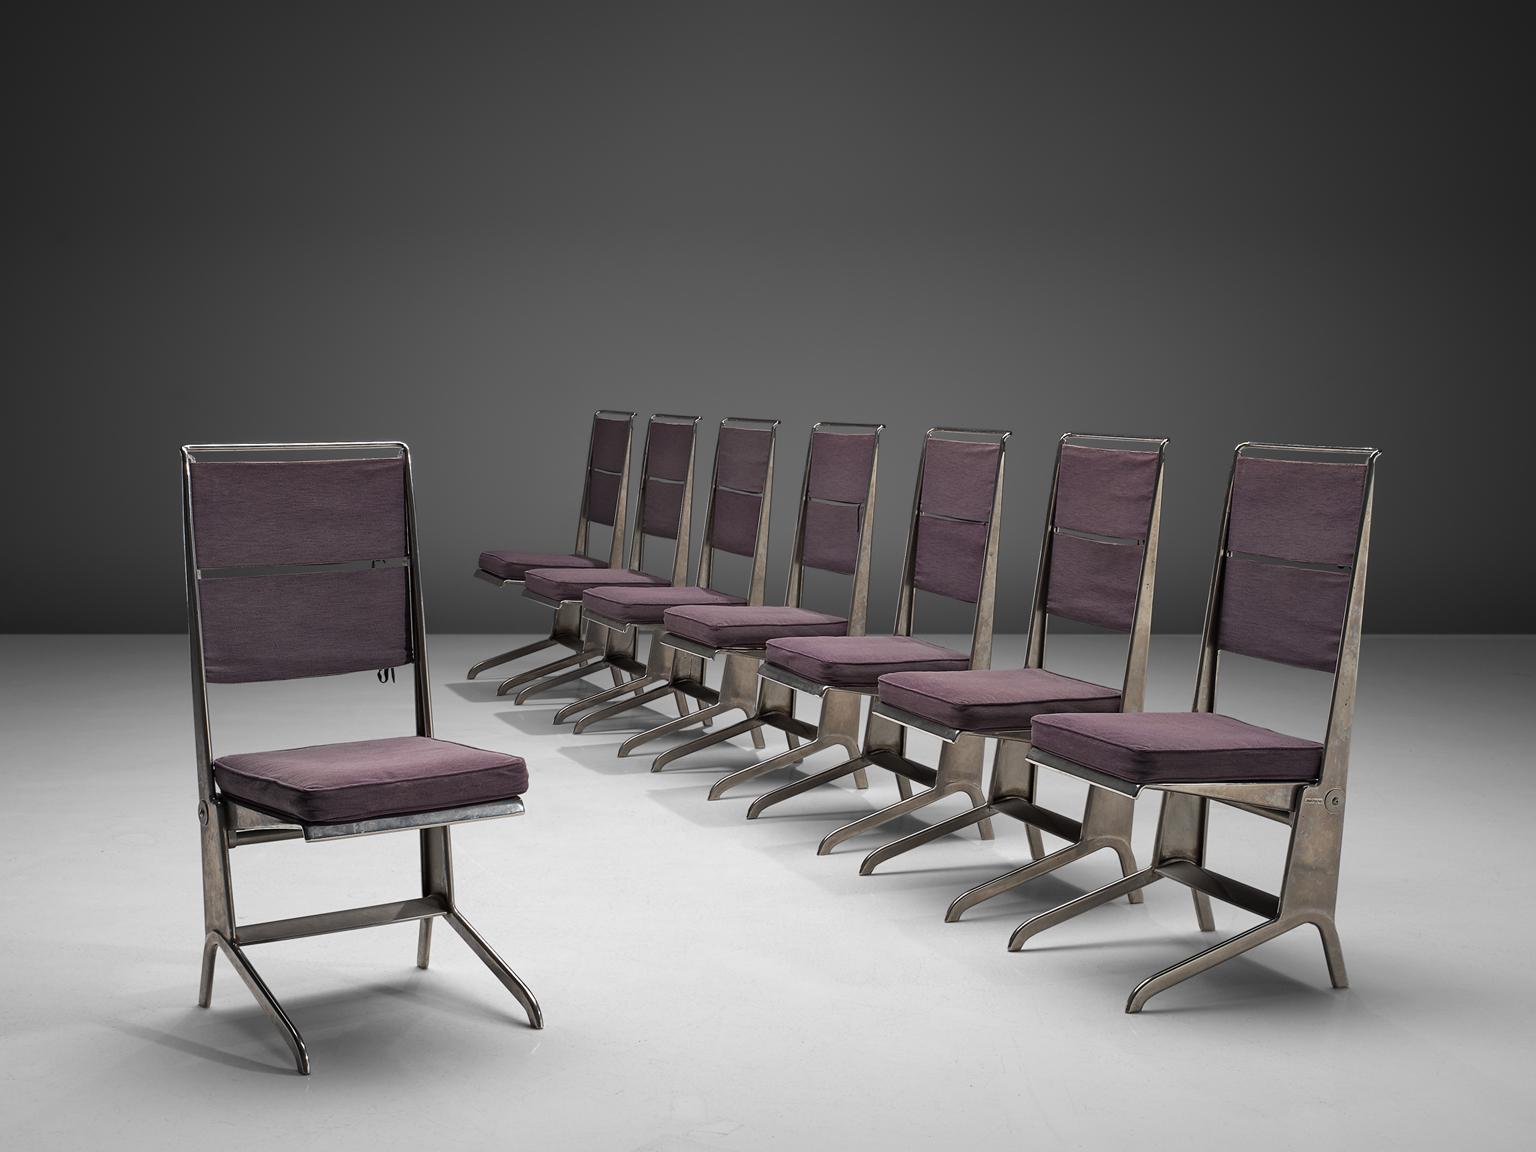 Jean Prouve´, reclining chairs, steel and canvas, France, design circa 1930, Manufactured by Tecta, 1983

This extremely rare set of chairs was designed by Jean Prouve´ in 1930. Originally only 8 of these were produced, for Prouvé's sister. In